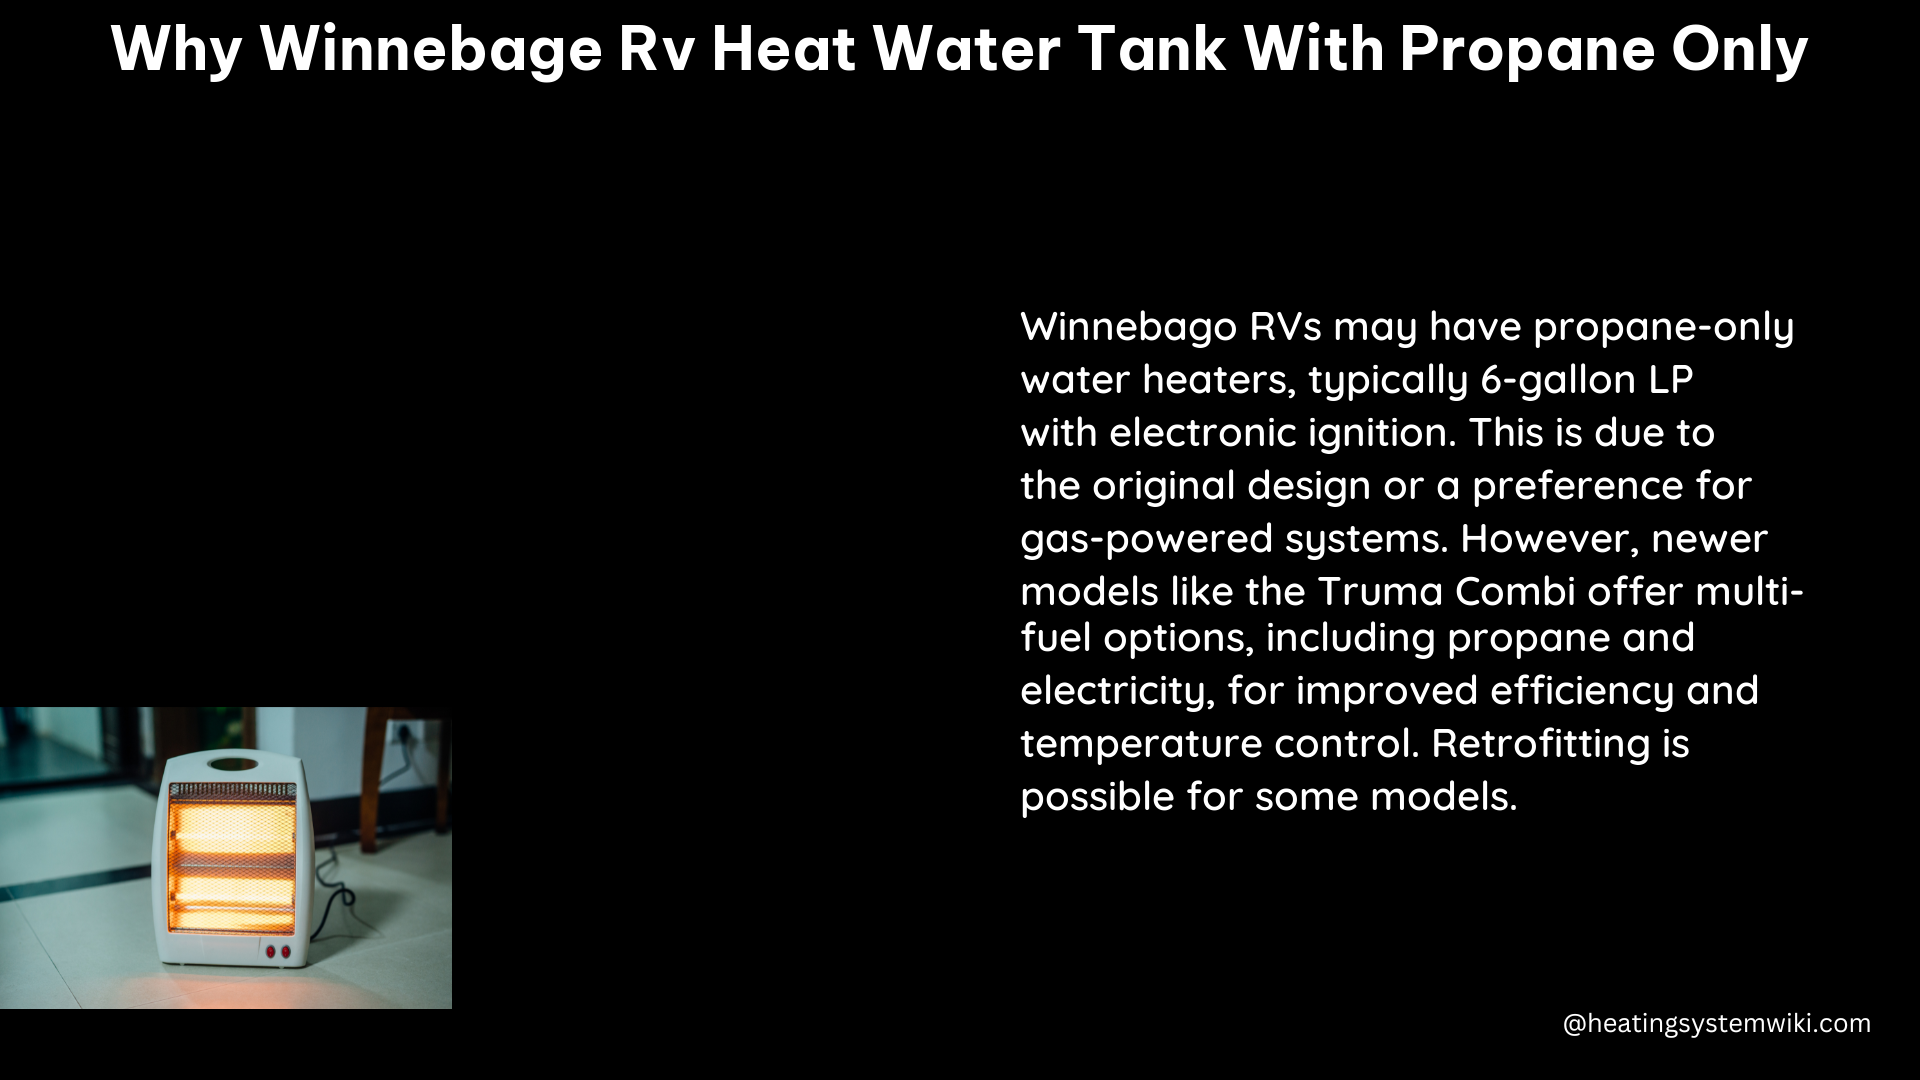 why winnebage rv heat water tank with propane only